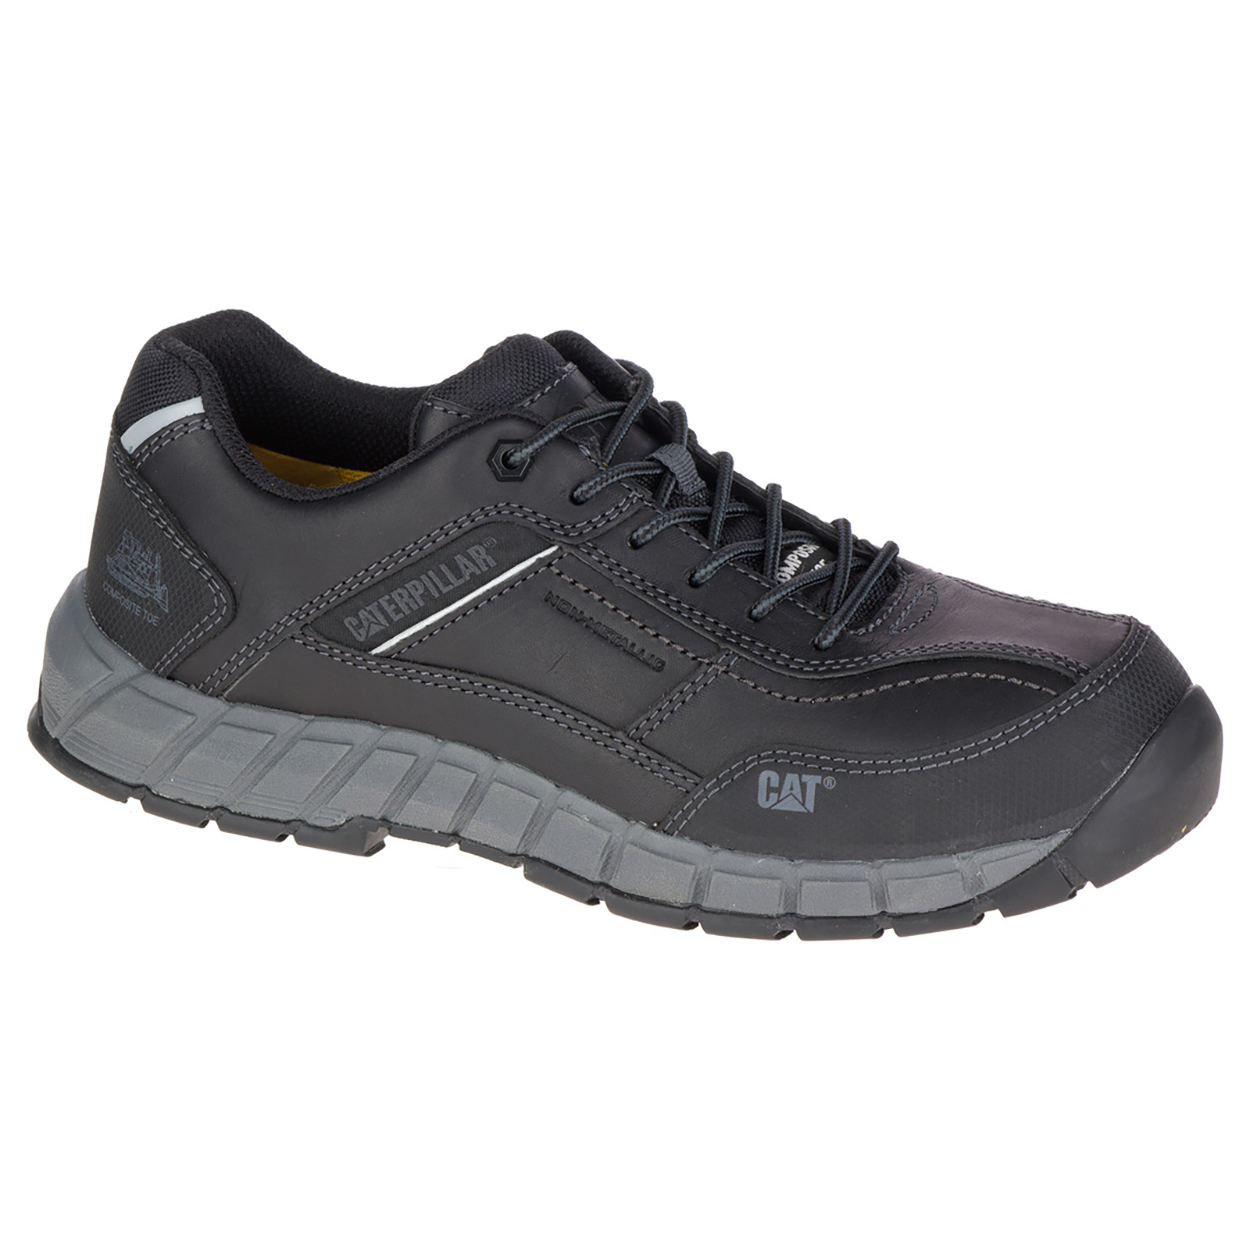 Caterpillar Shoes Islamabad - Caterpillar Streamline Leather Ct S1 P Hro Sra Sa Mens Safety Shoes Black (589120-PYS)